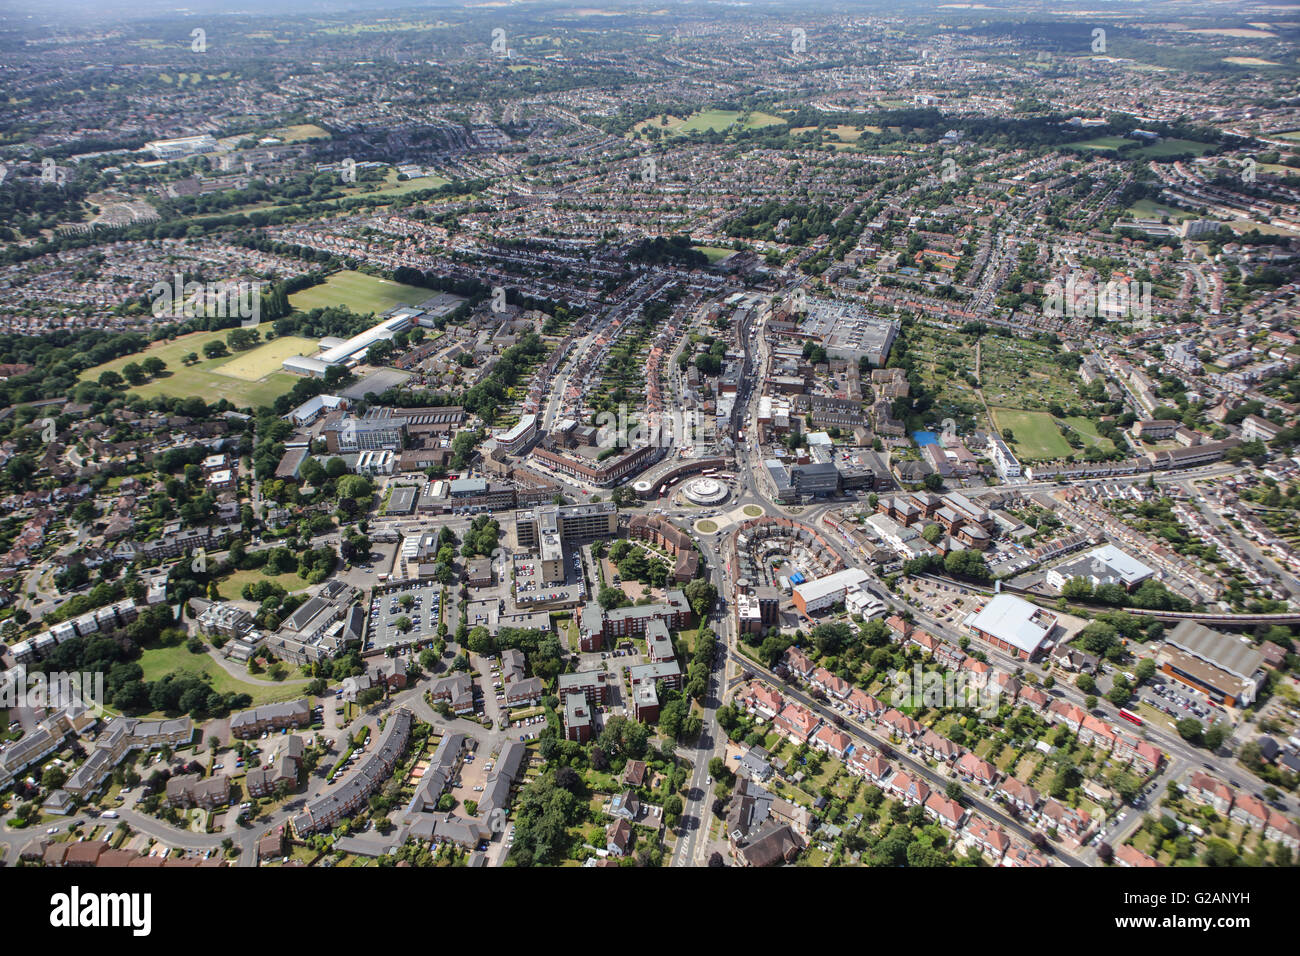 An aerial view of Southgate, a suburban area of North London Stock Photo